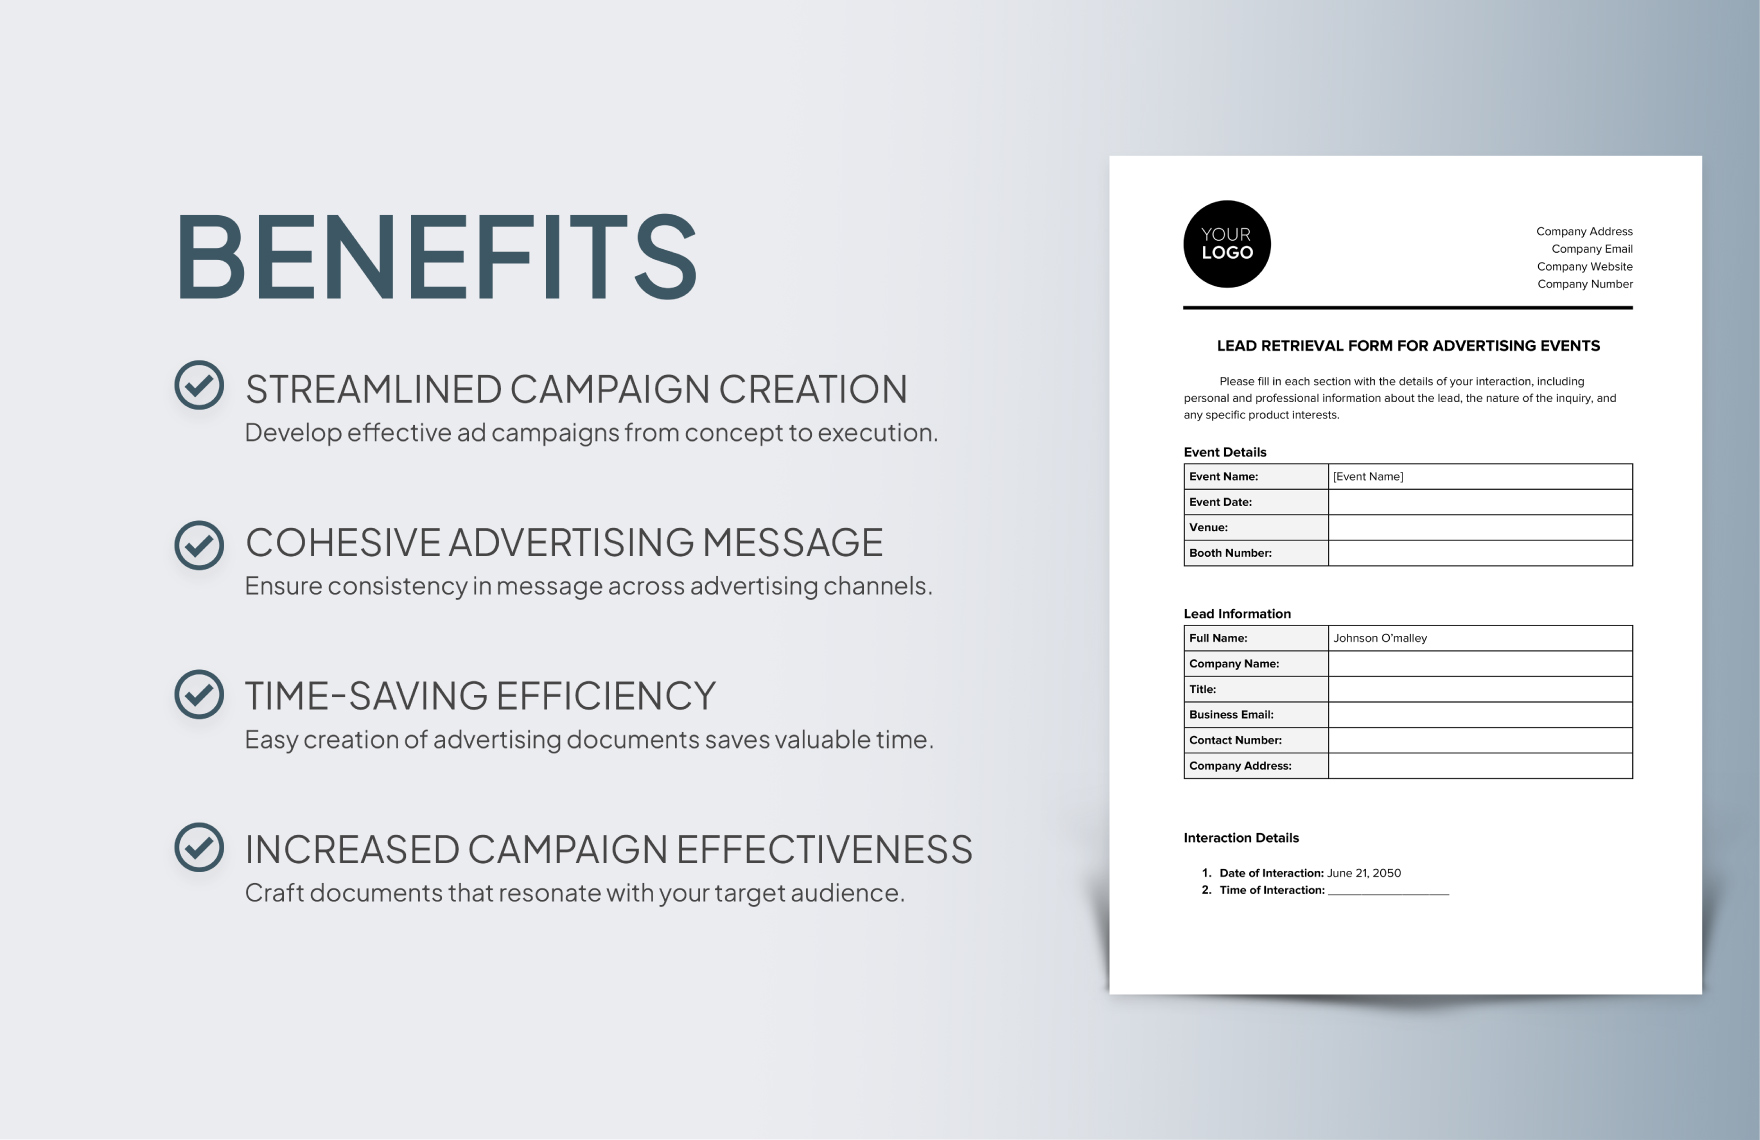 Lead Retrieval Form for Advertising Events Template